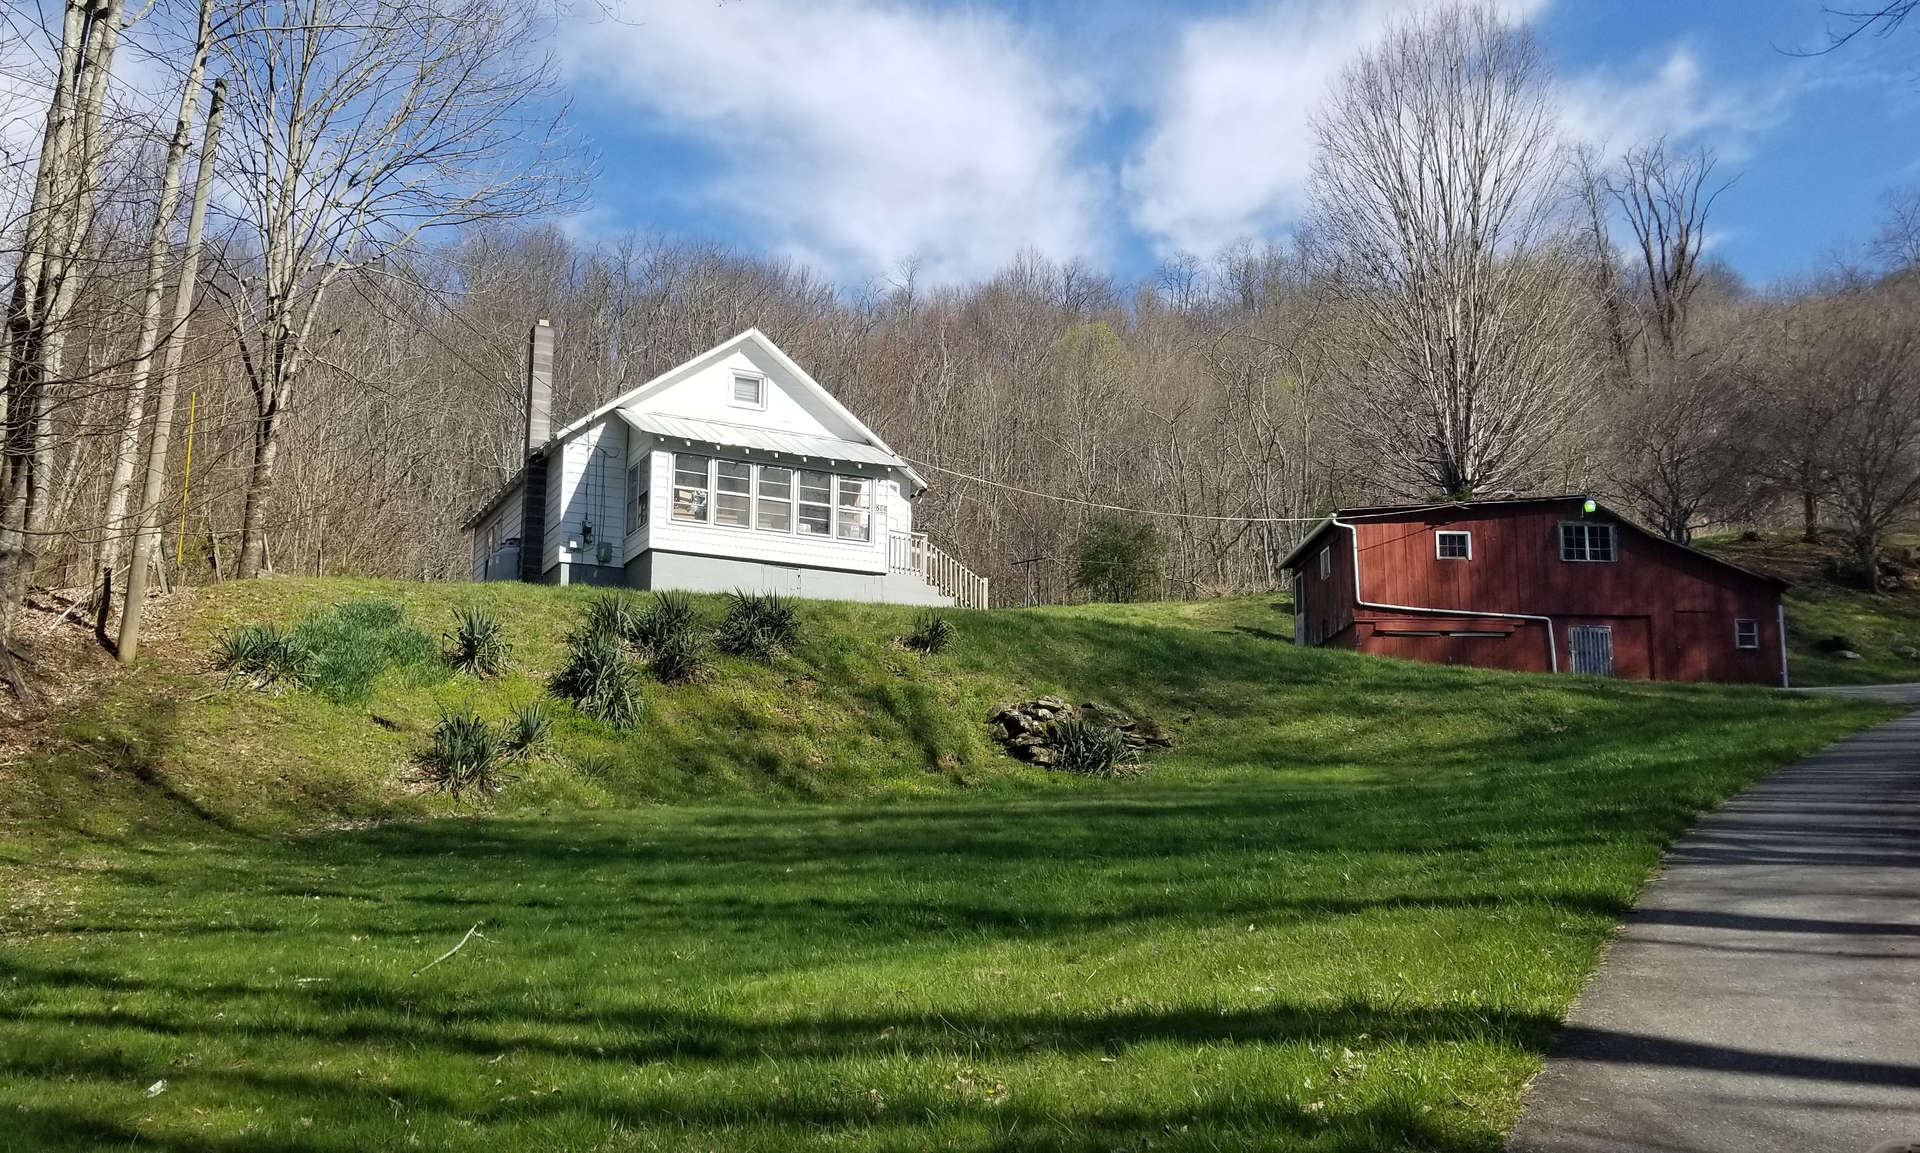 Watauga County NC Mountain Farm!  Return to old values and real farm living with this older 2-bedroom, 1-bath farmhouse nestled among 32.05 acres of both pasture and woodlands.